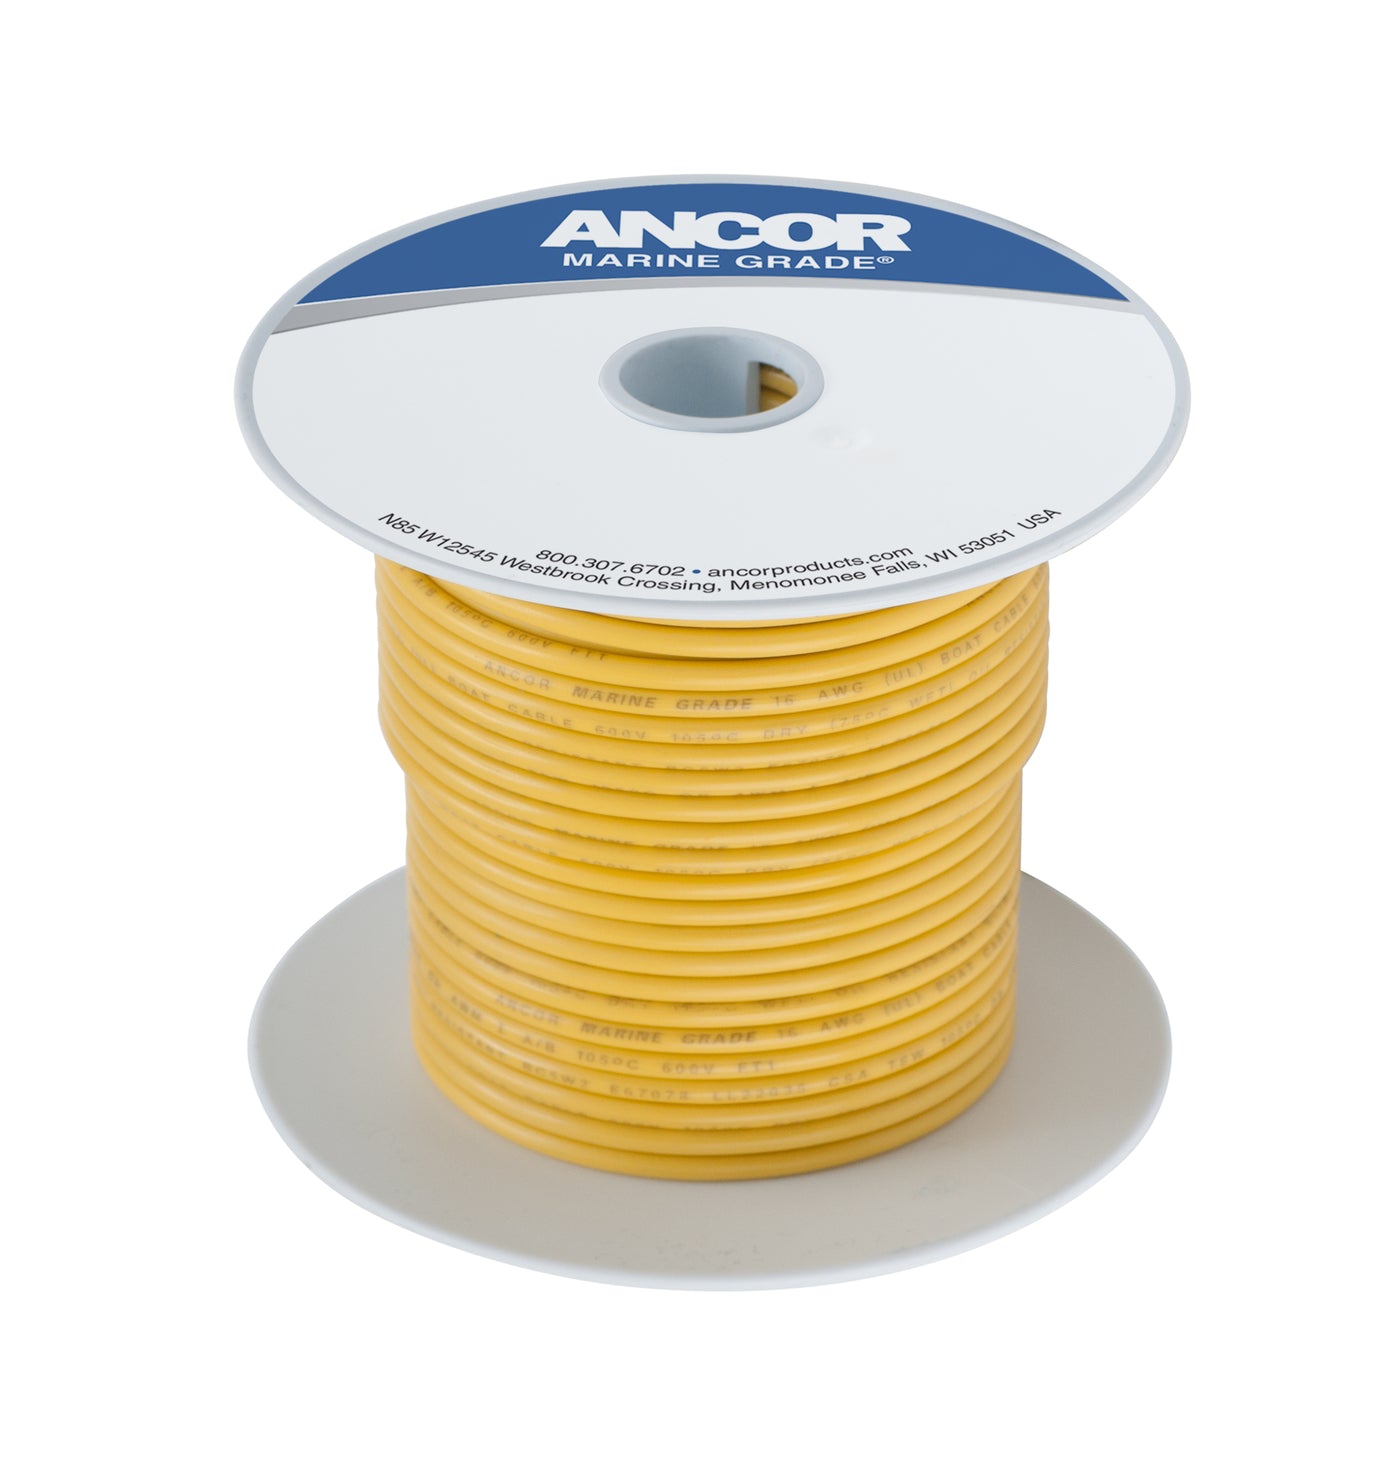 Ancor 112905 Tinned Copper Wire, 6 AWG (13mm²), Yellow - 50ft